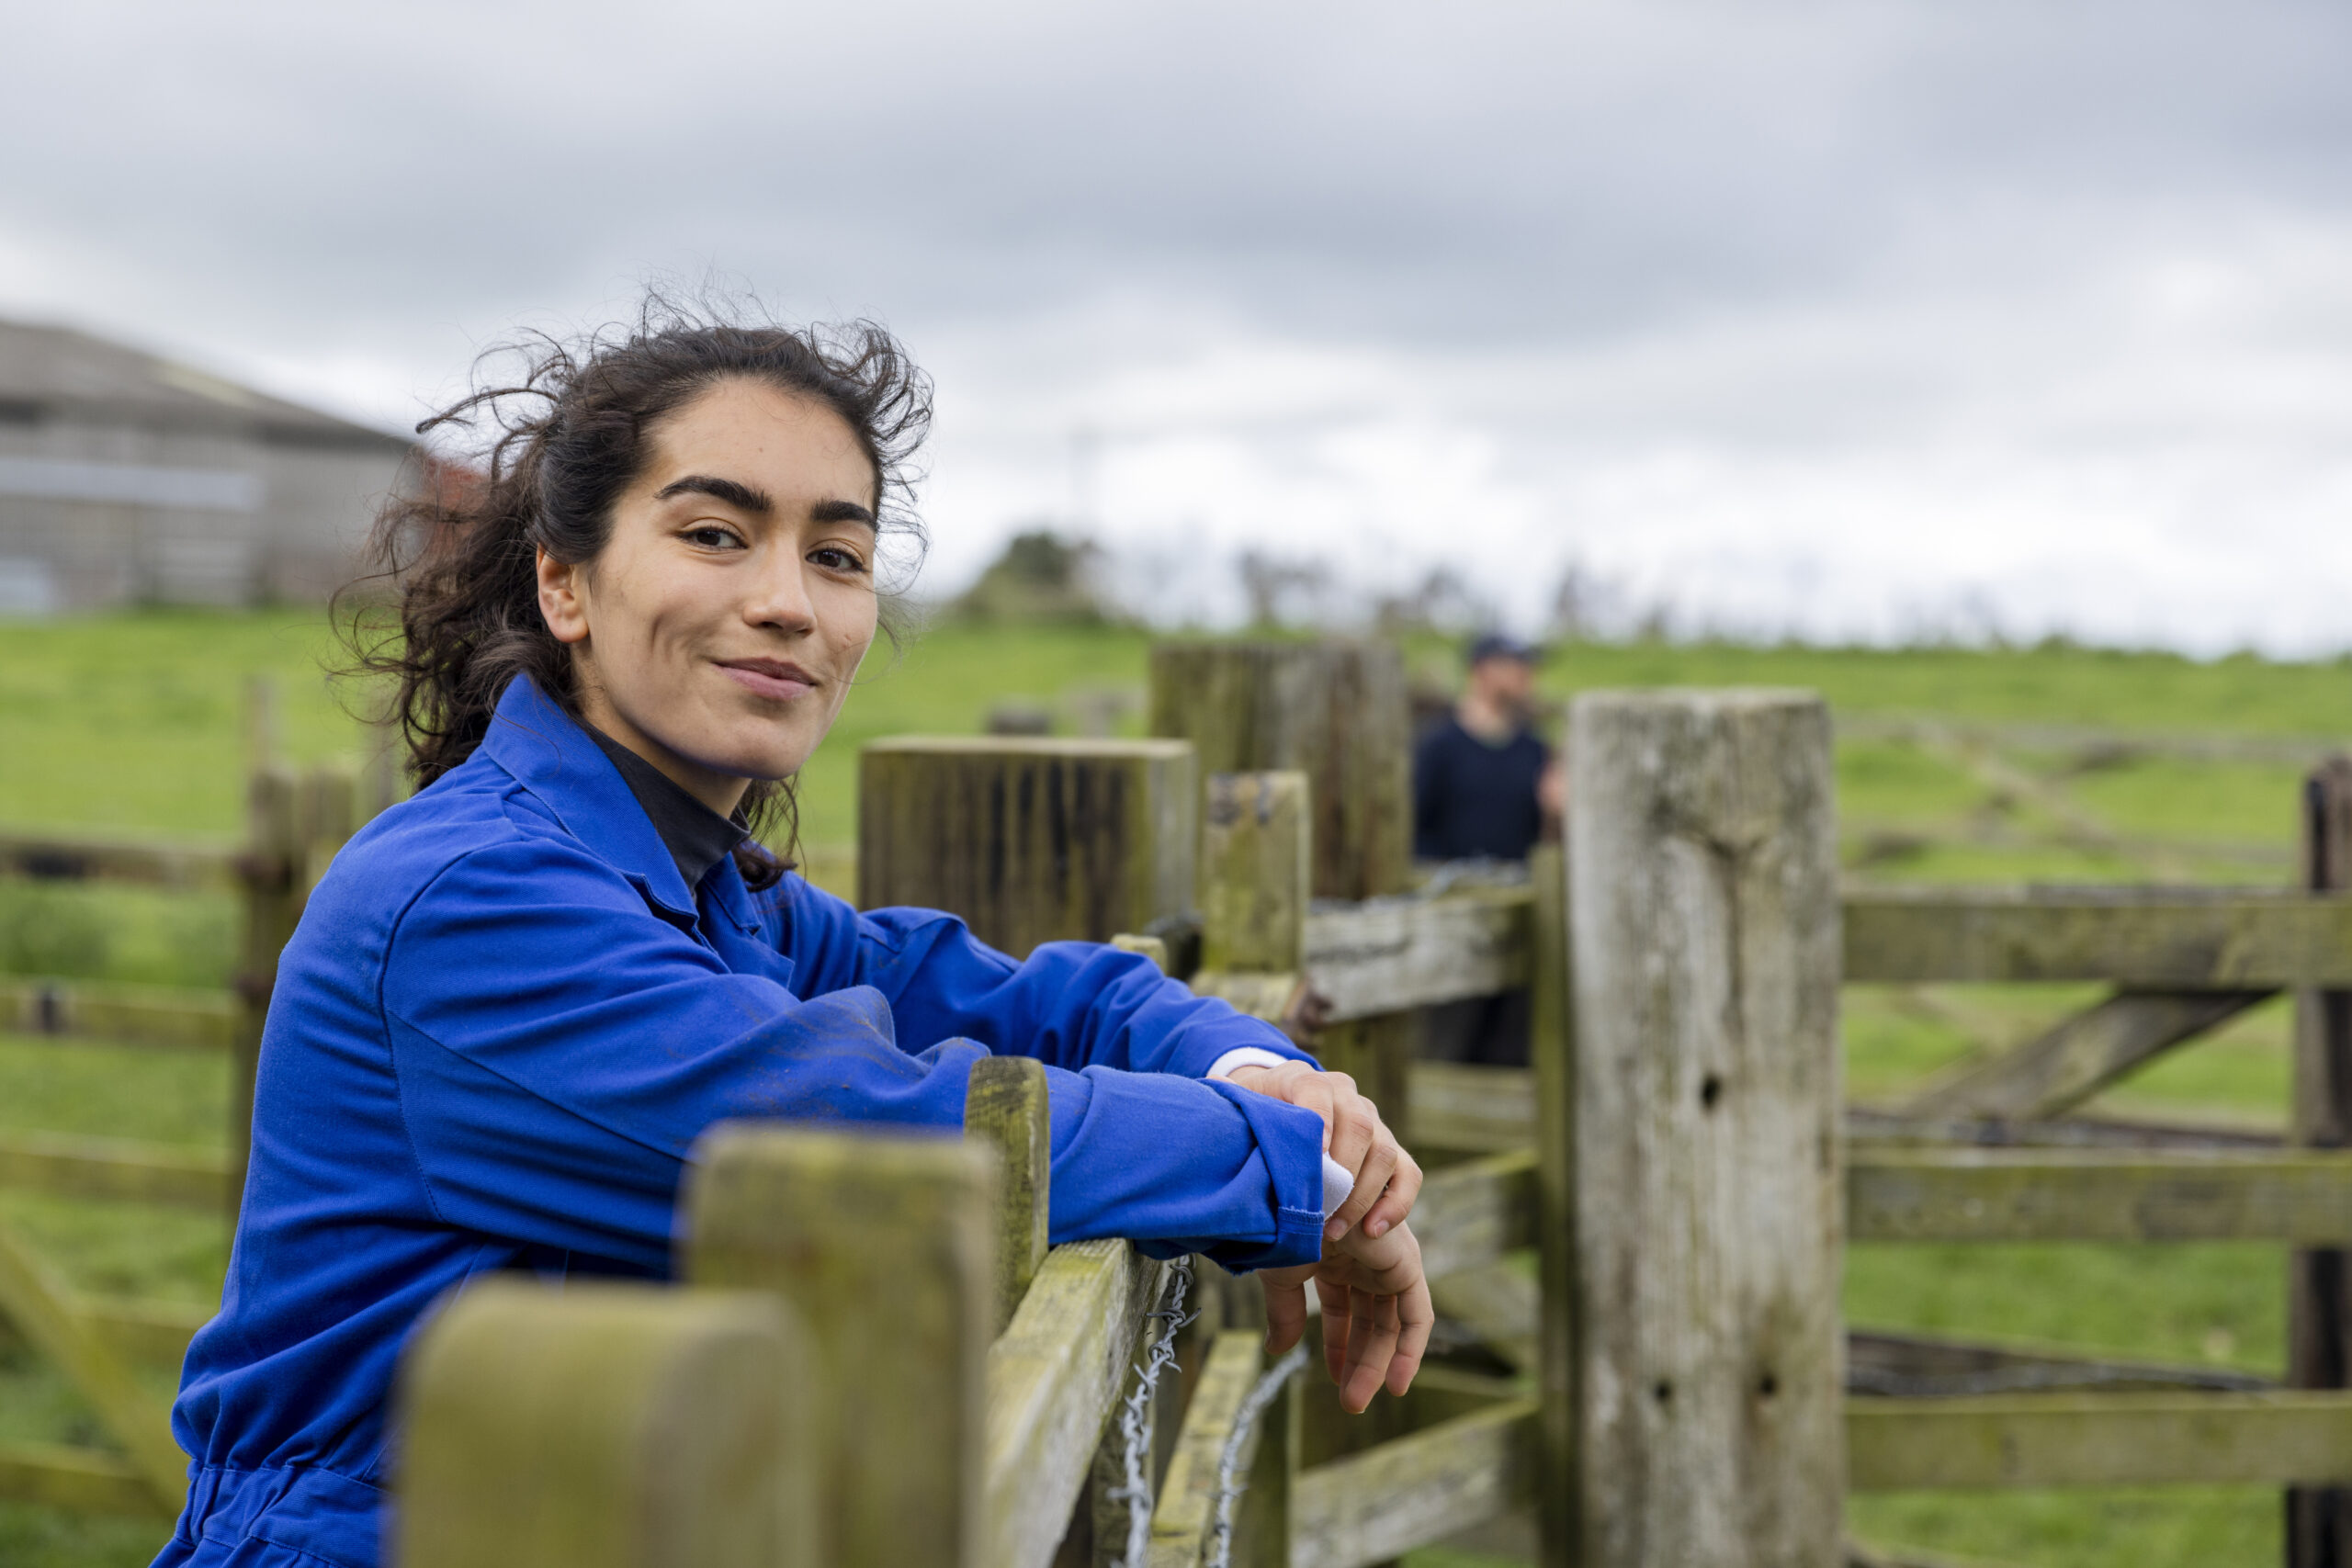 A portrait of a young female farmer wearing overalls, standing and leaning against a fence at the farm she works at in Embleton, North East England while looking at the camera and smiling.